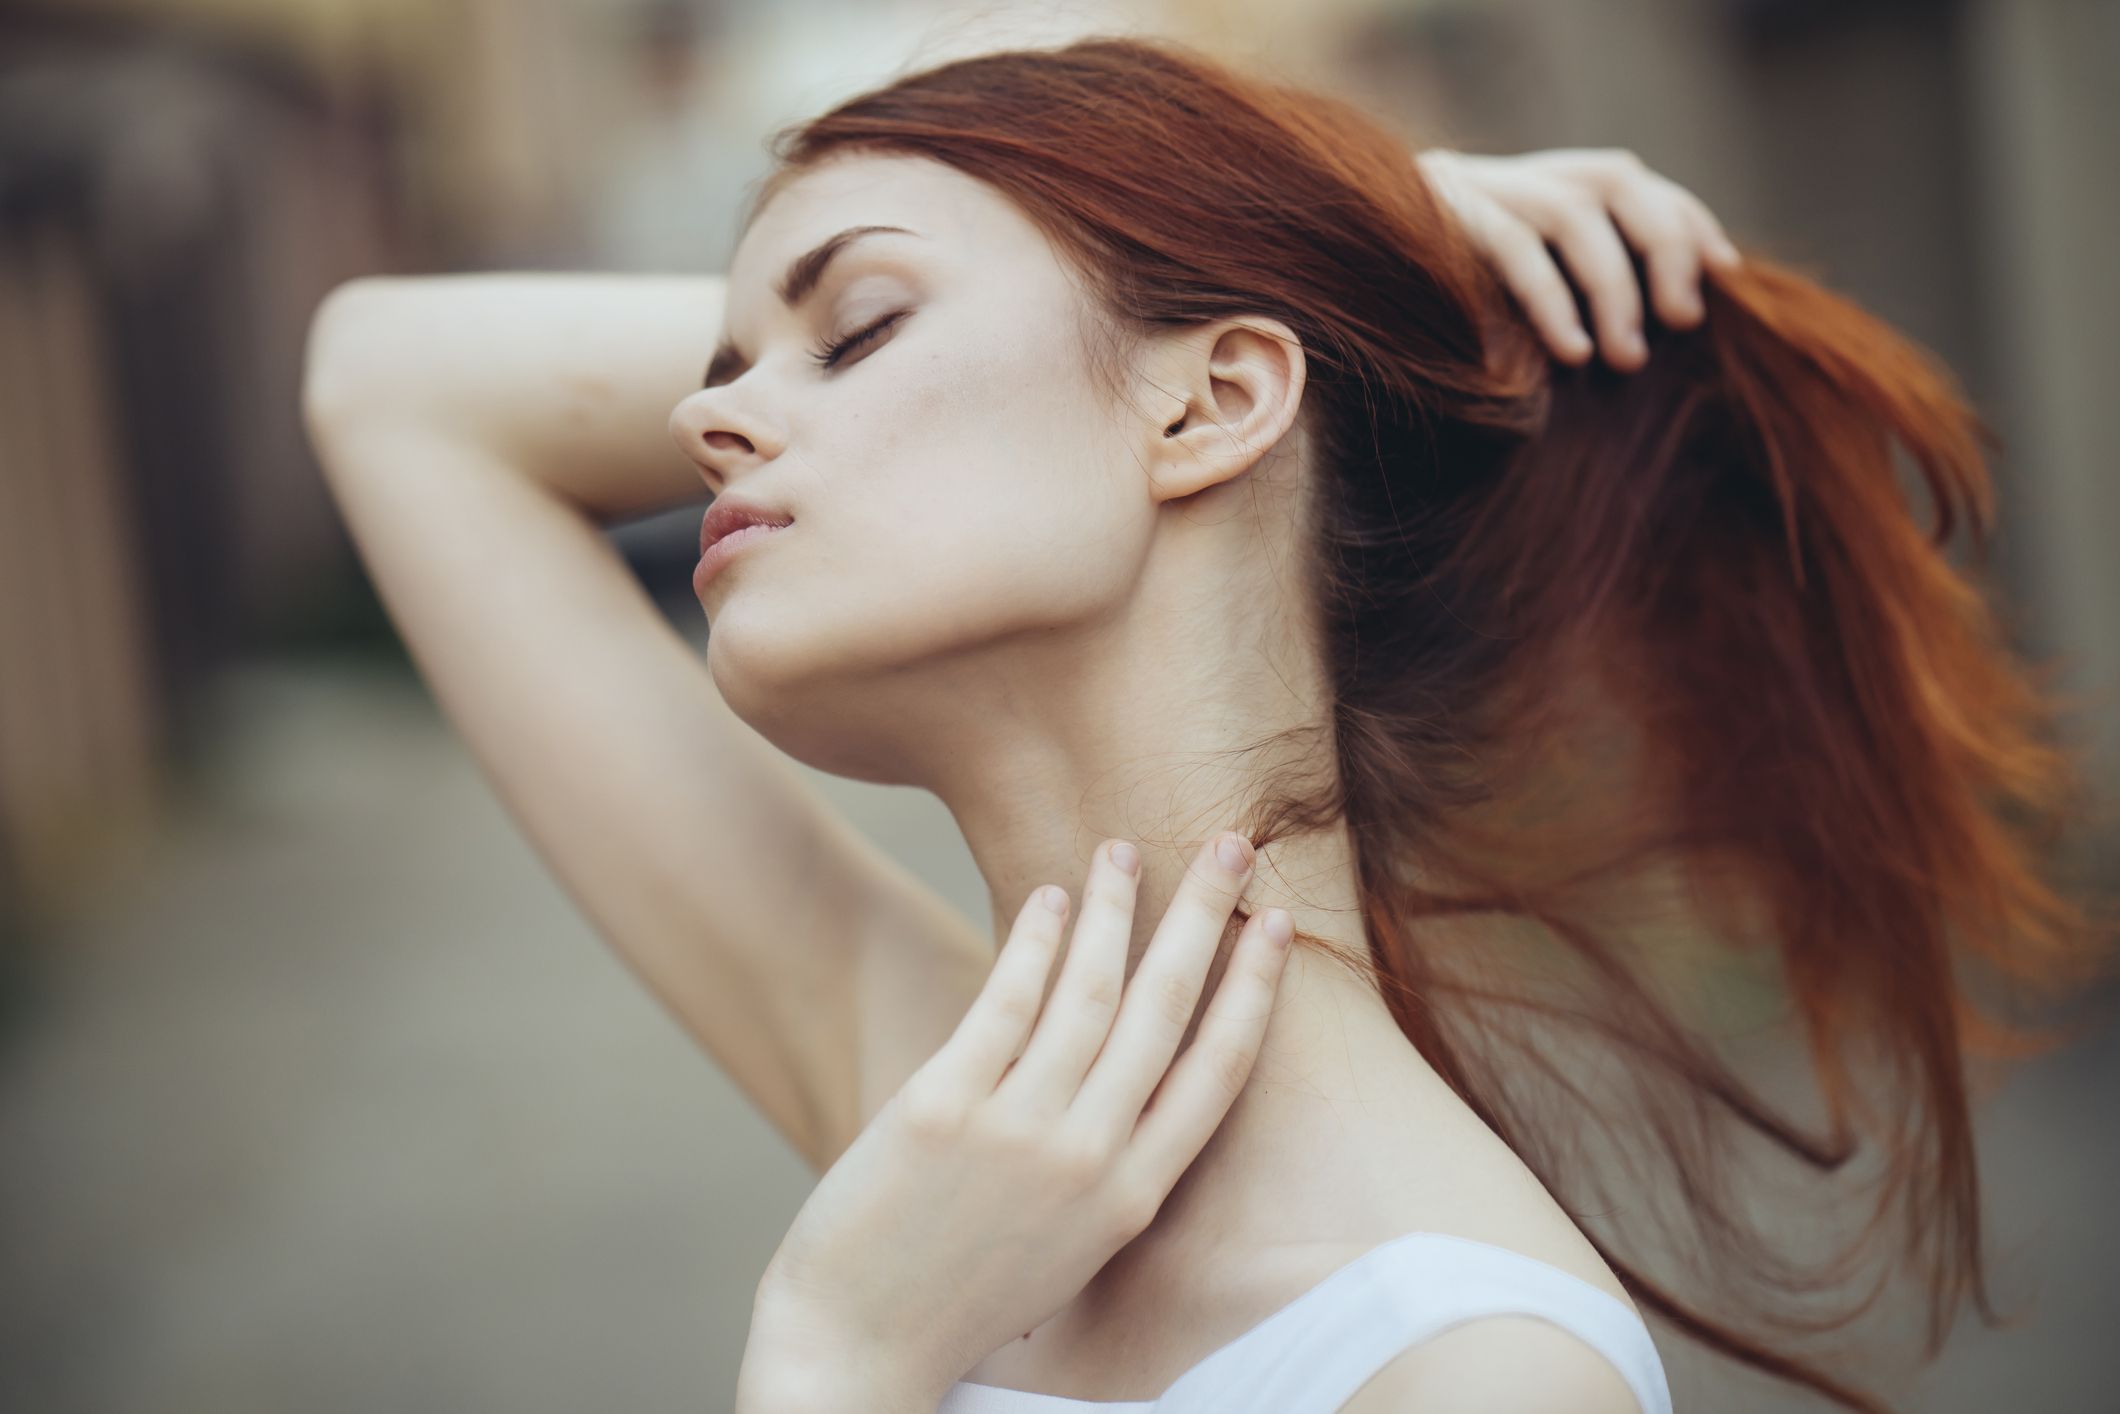 caucasian woman holding hair and rubbing neck